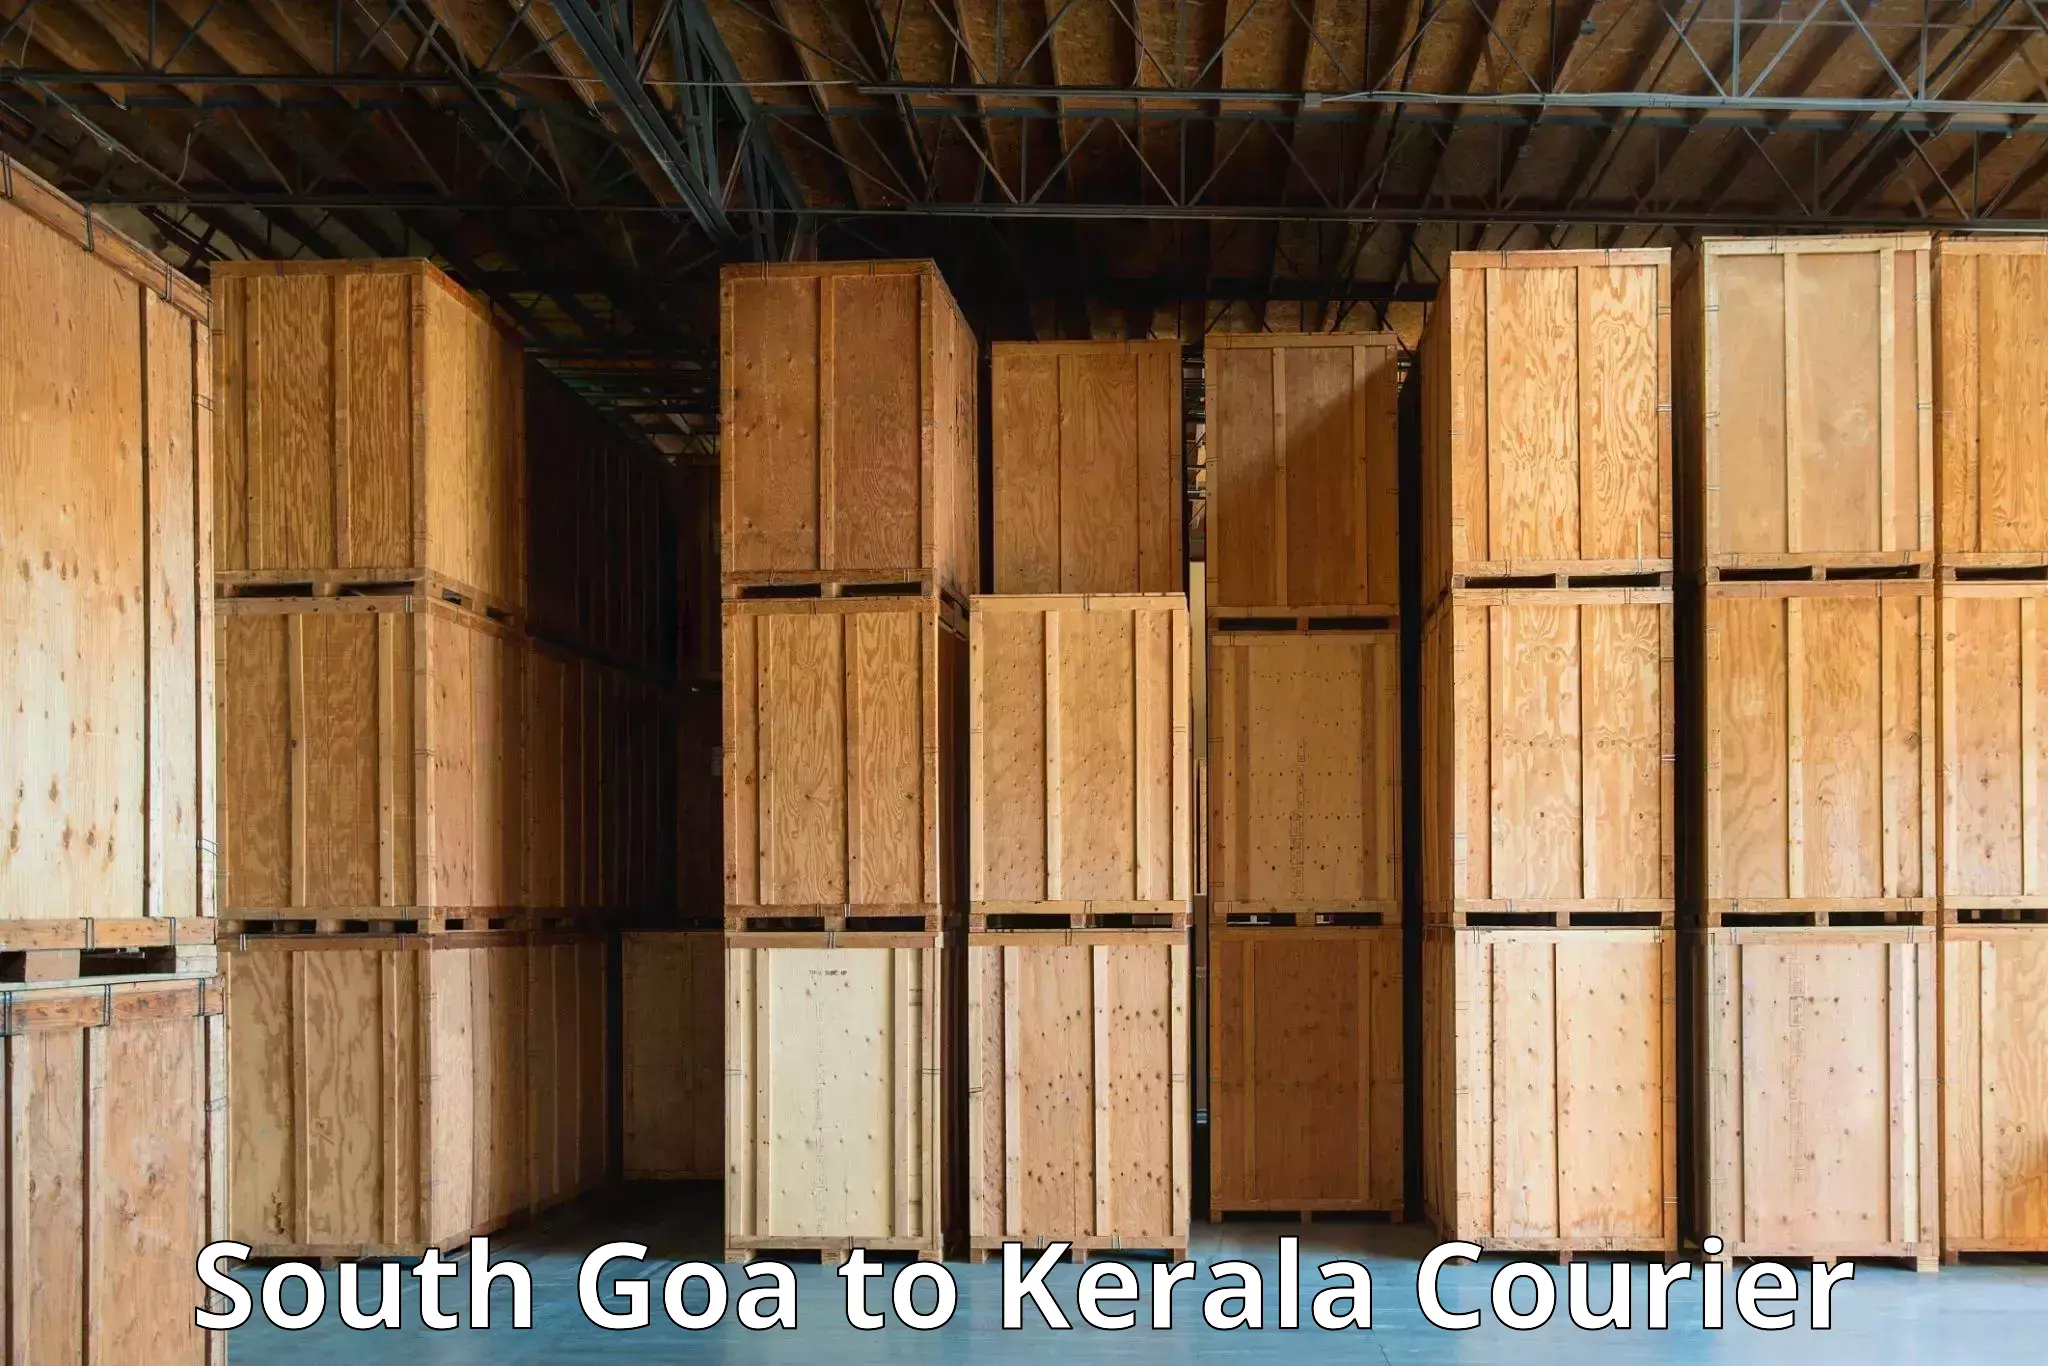 Courier service innovation South Goa to Kottayam